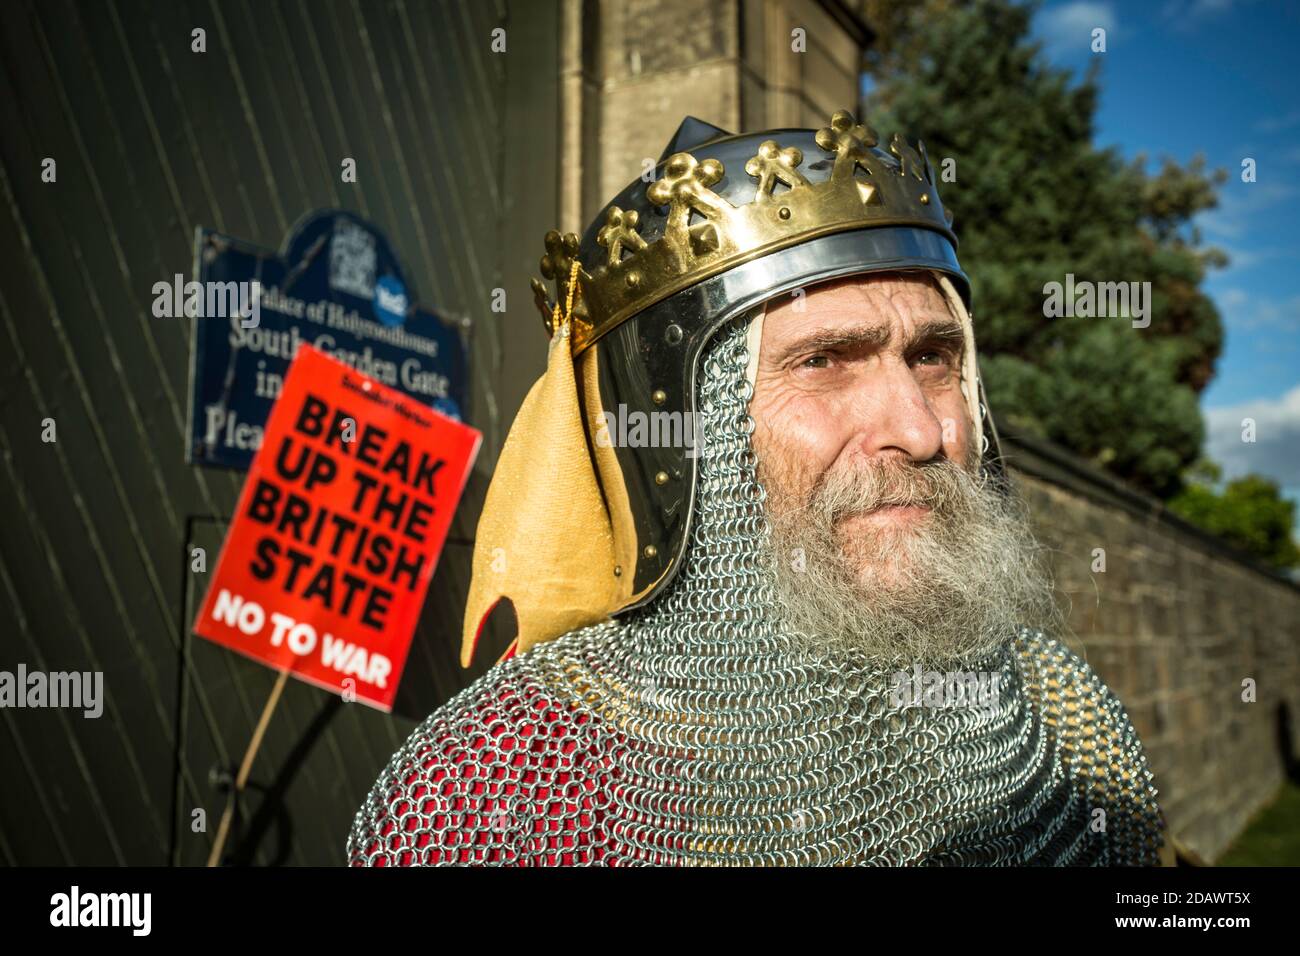 A man dressed as King Robert the Bruce takes part in an independence rally marking the 704th anniversary of the Battle of Bannockburn. Edinburgh, UK. Stock Photo